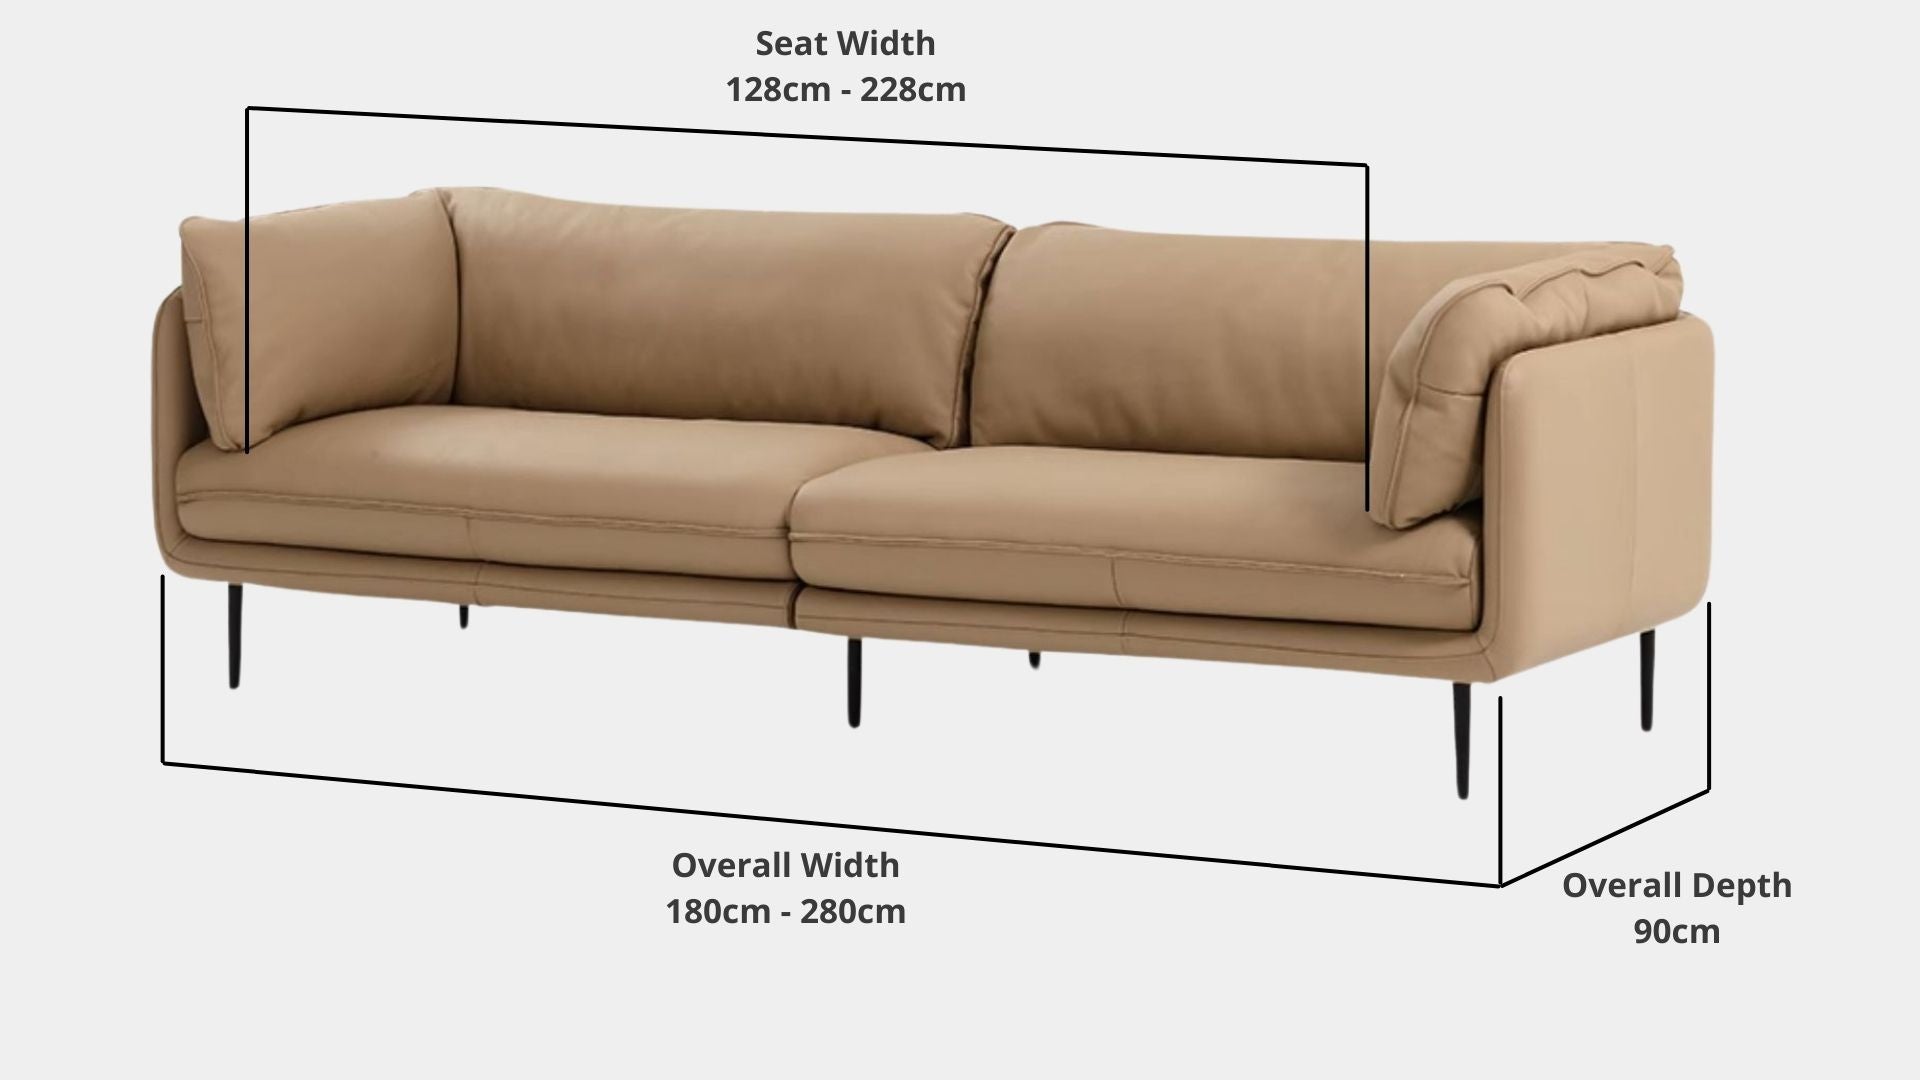 Details the key dimensions in terms of overall width, overall depth and seat width for Cuddle Half Leather Sofa